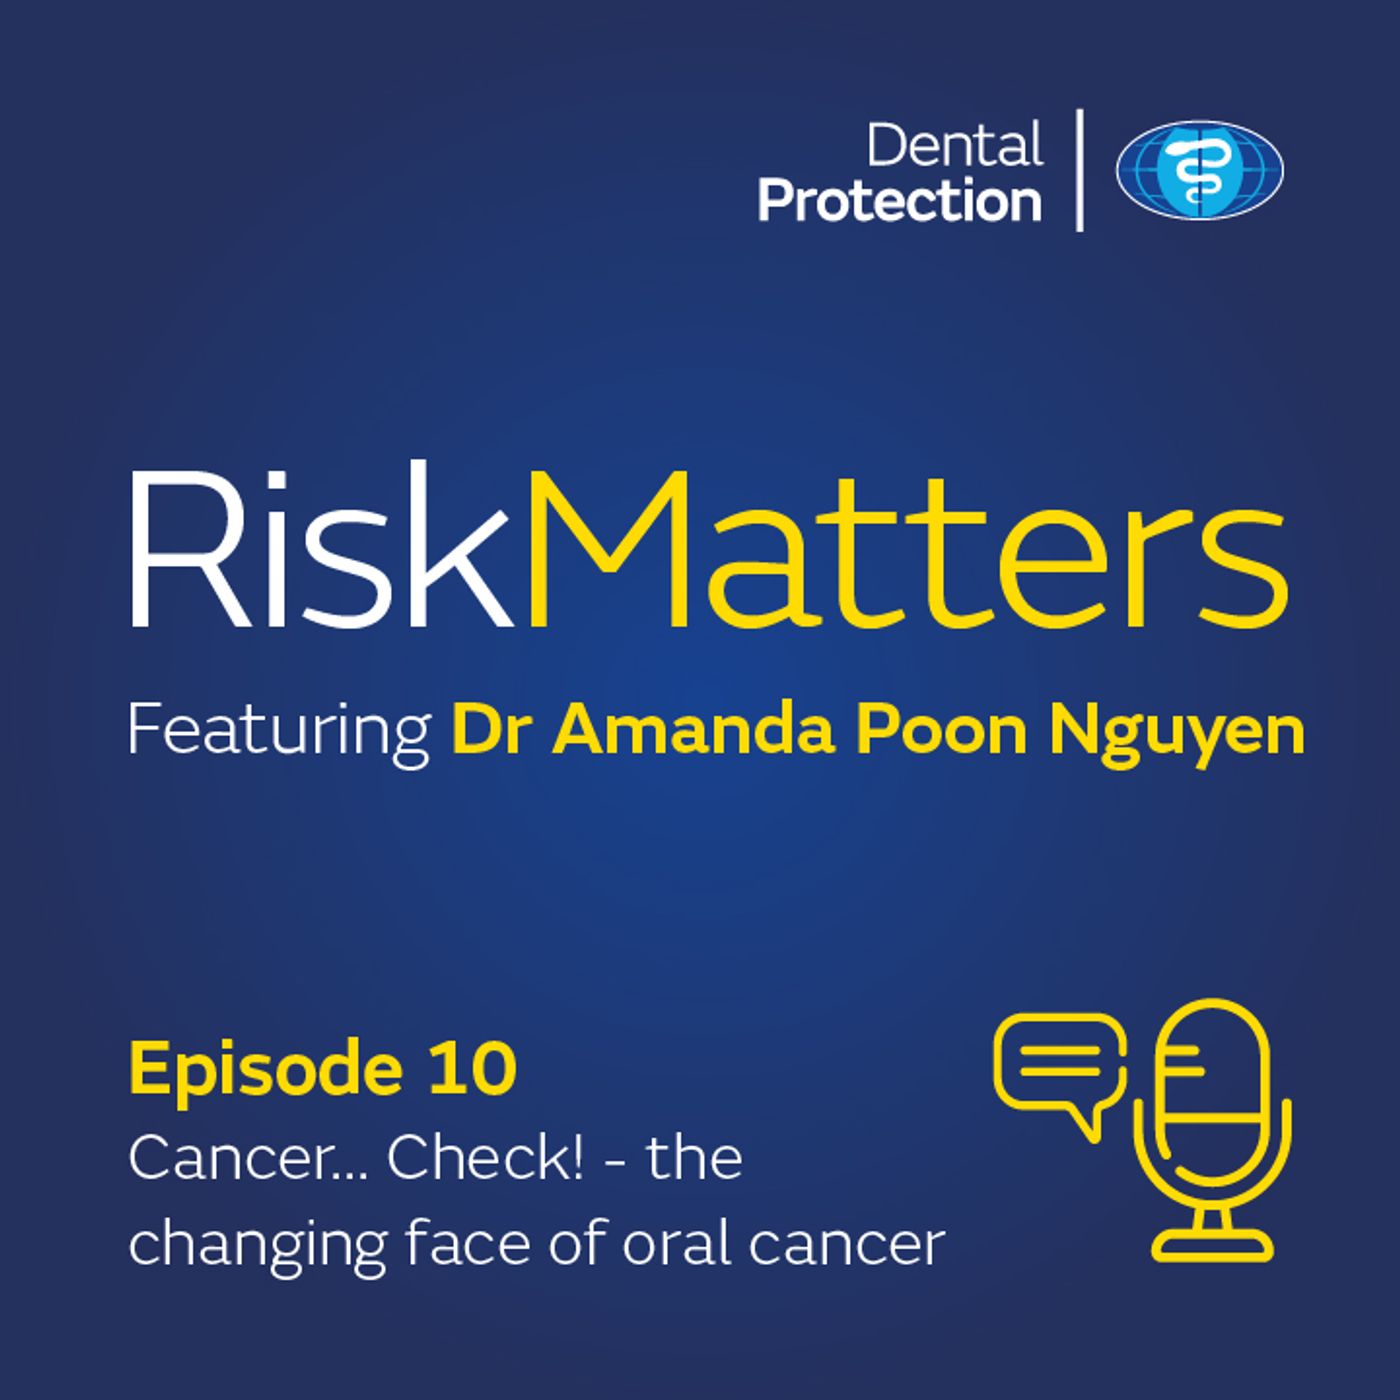 RiskMatters - Cancer... Check! - the changing face of oral cancer